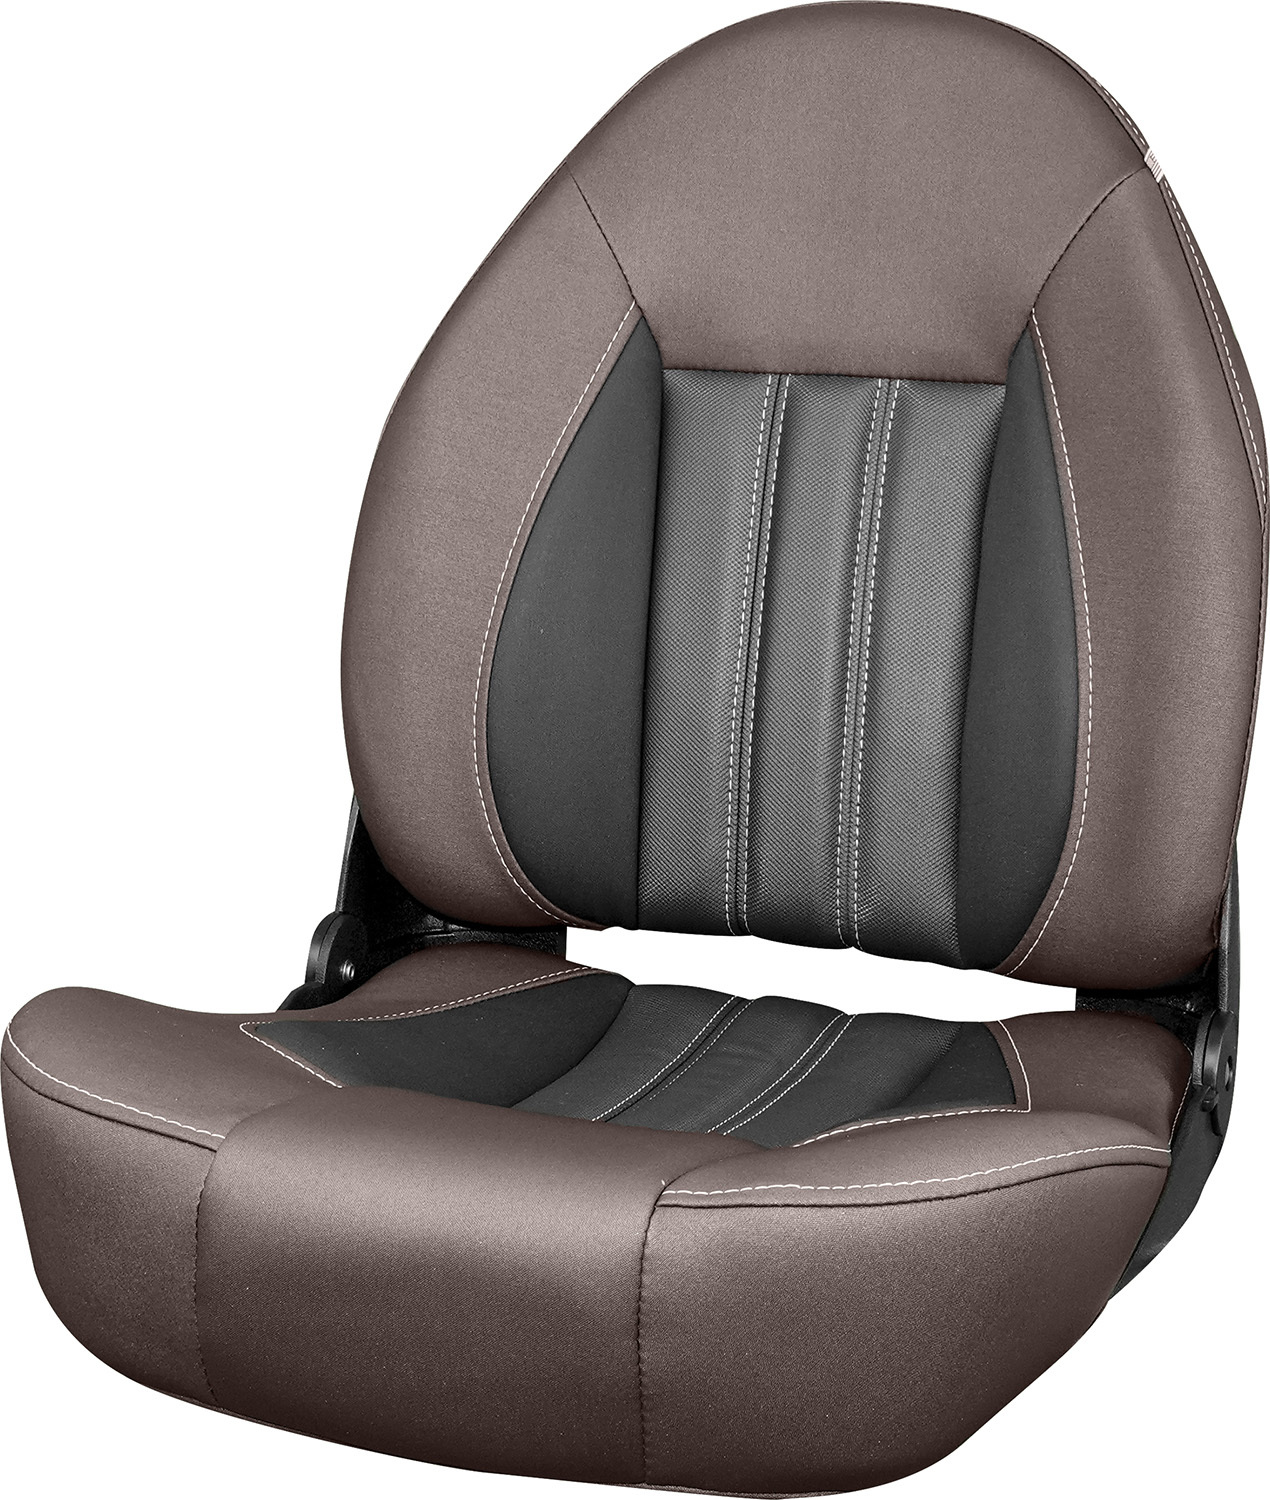 ProBax Orthopedic Limited Edition Boat Seat – Store – TEMPRESS